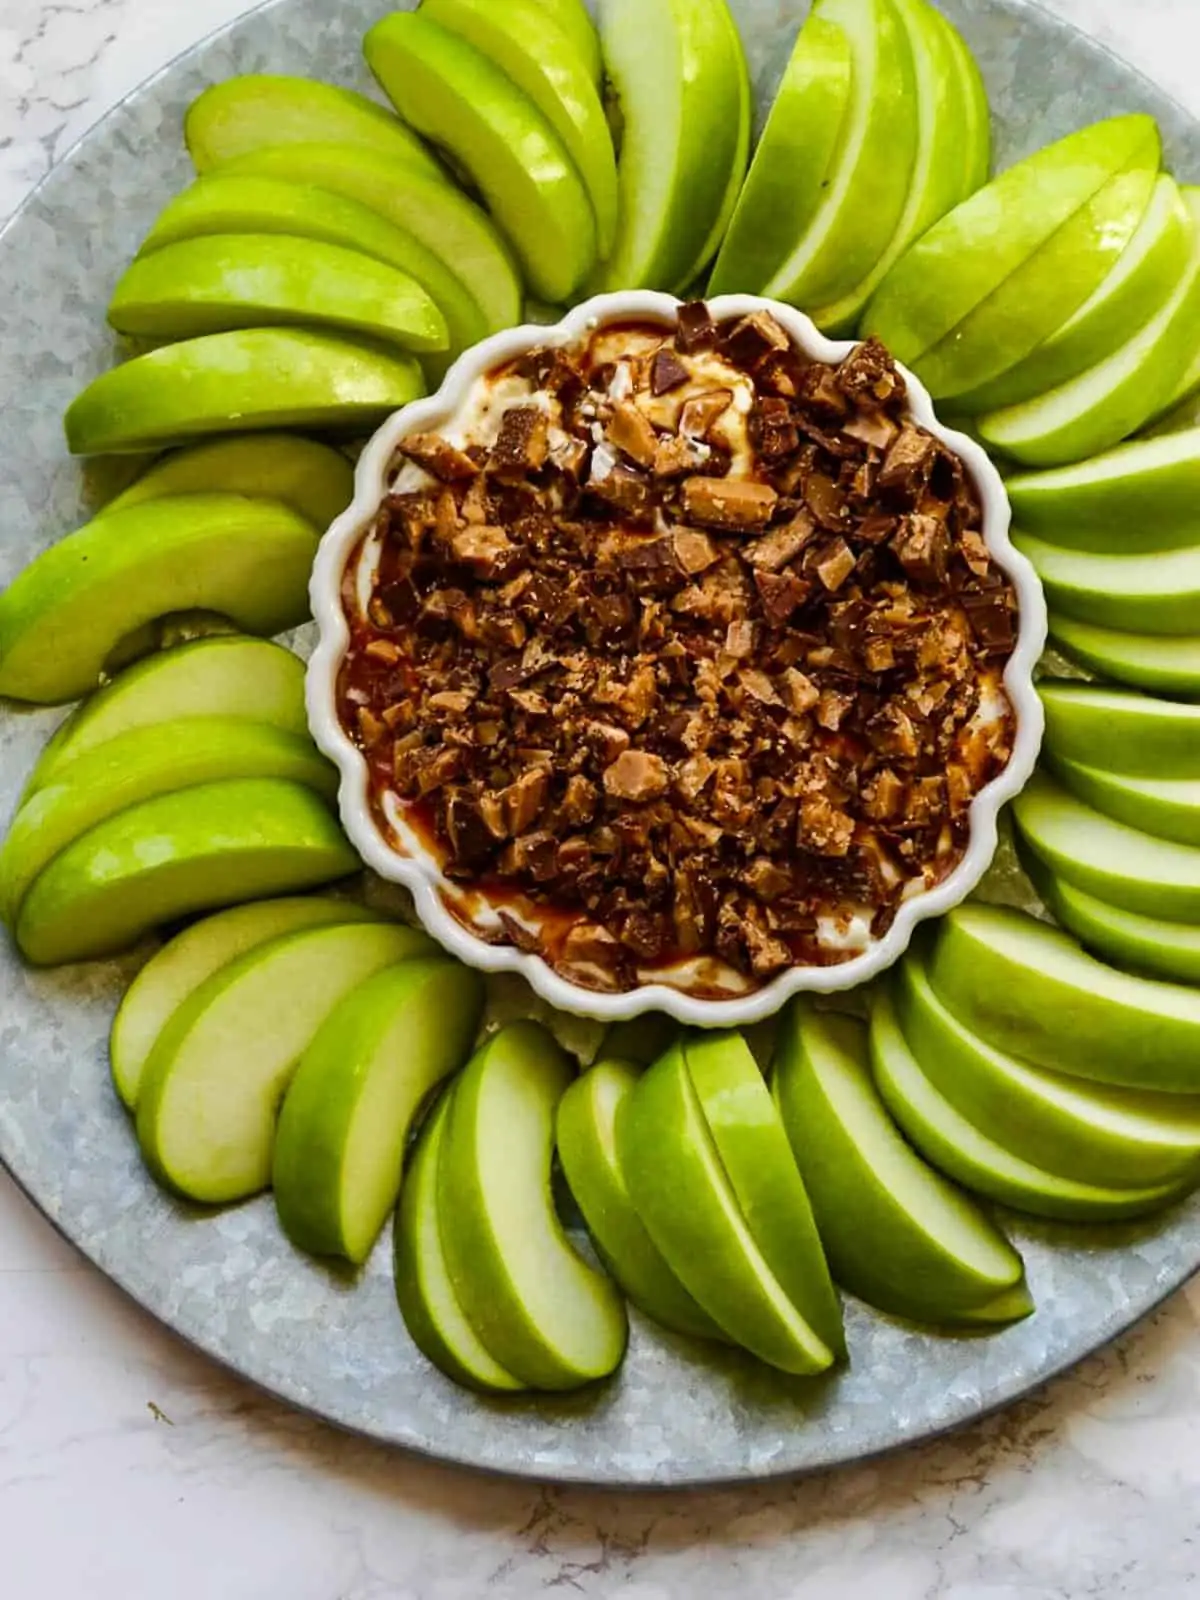 A large silver platter with green apple slices layed into a circular pattern around a white dish holding a sweet caramel apple dip for dessert topped with crushed Heath candy bars.